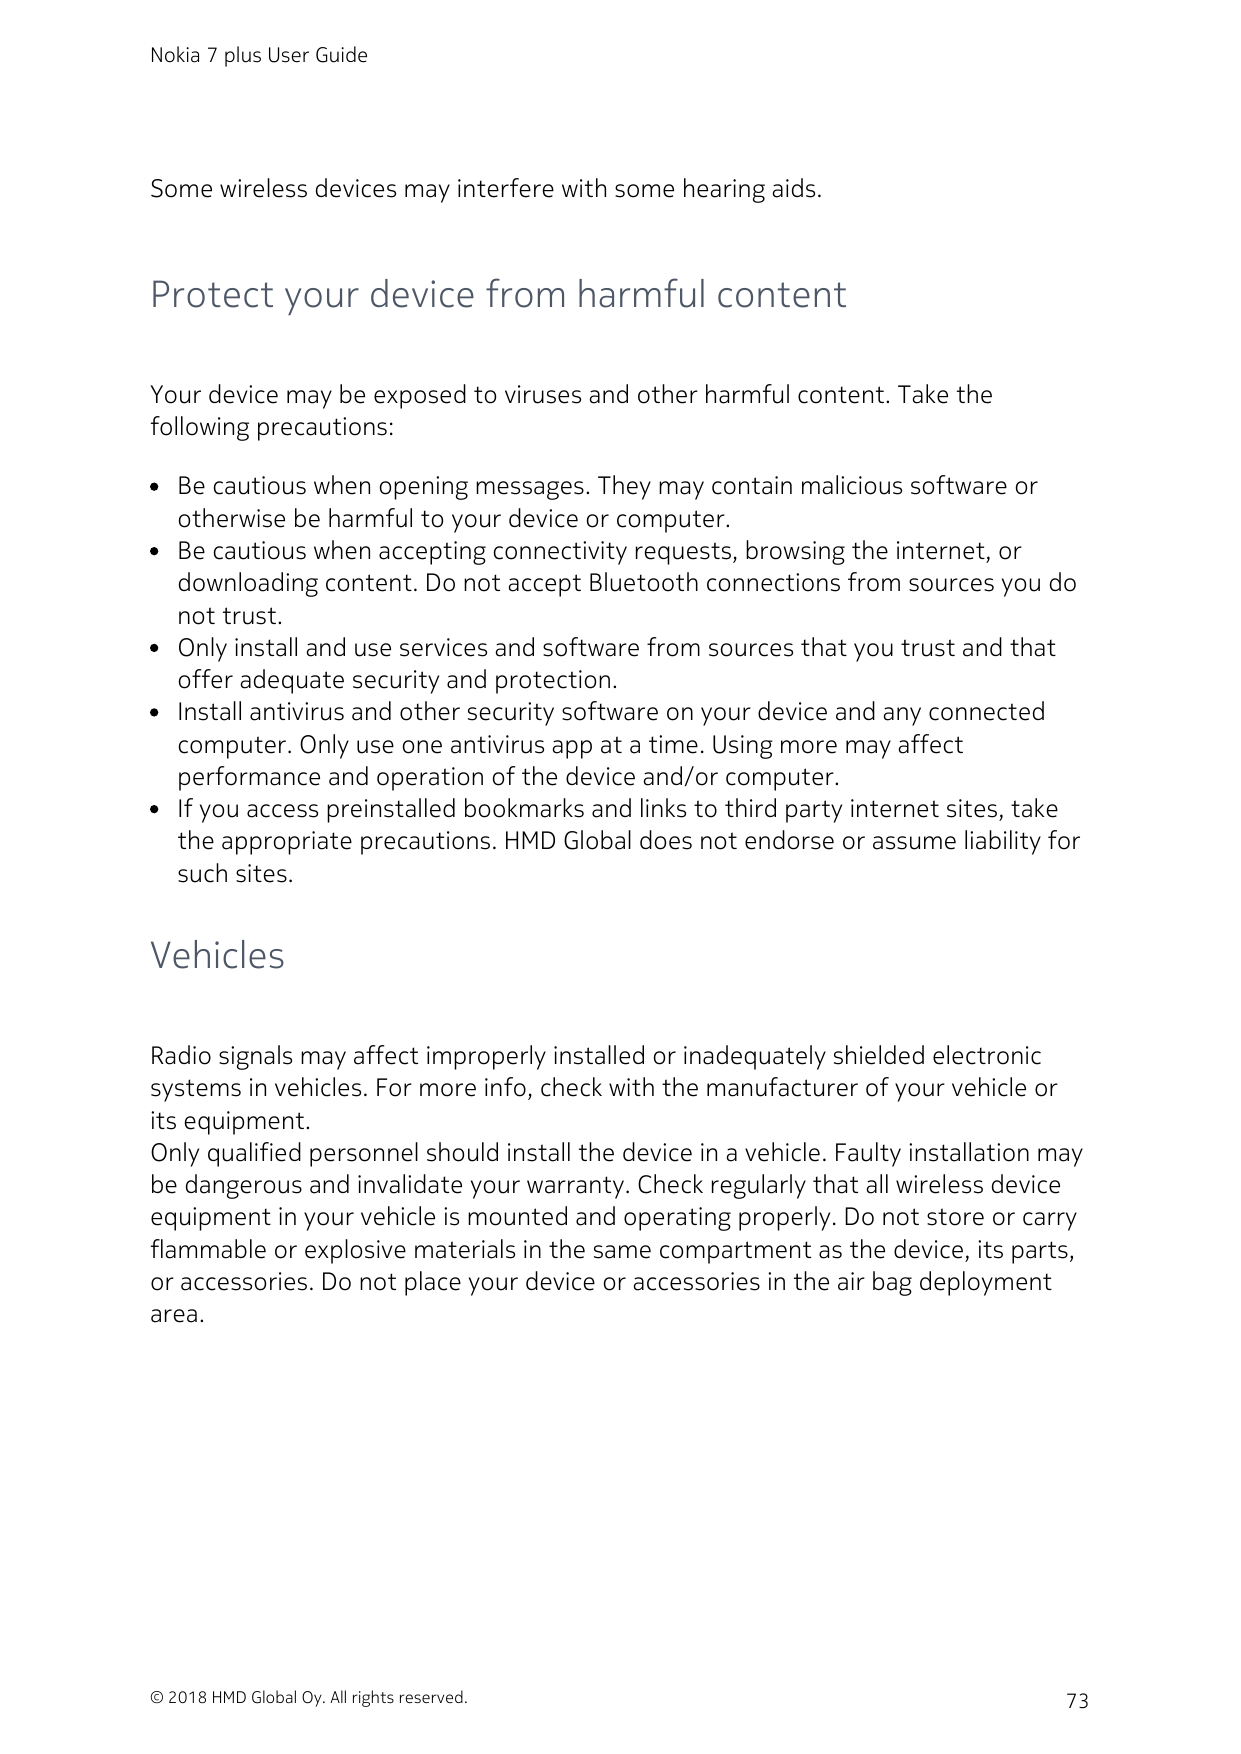 Nokia 7 plus User GuideSome wireless devices may interfere with some hearing aids.Protect your device from harmful contentYour d